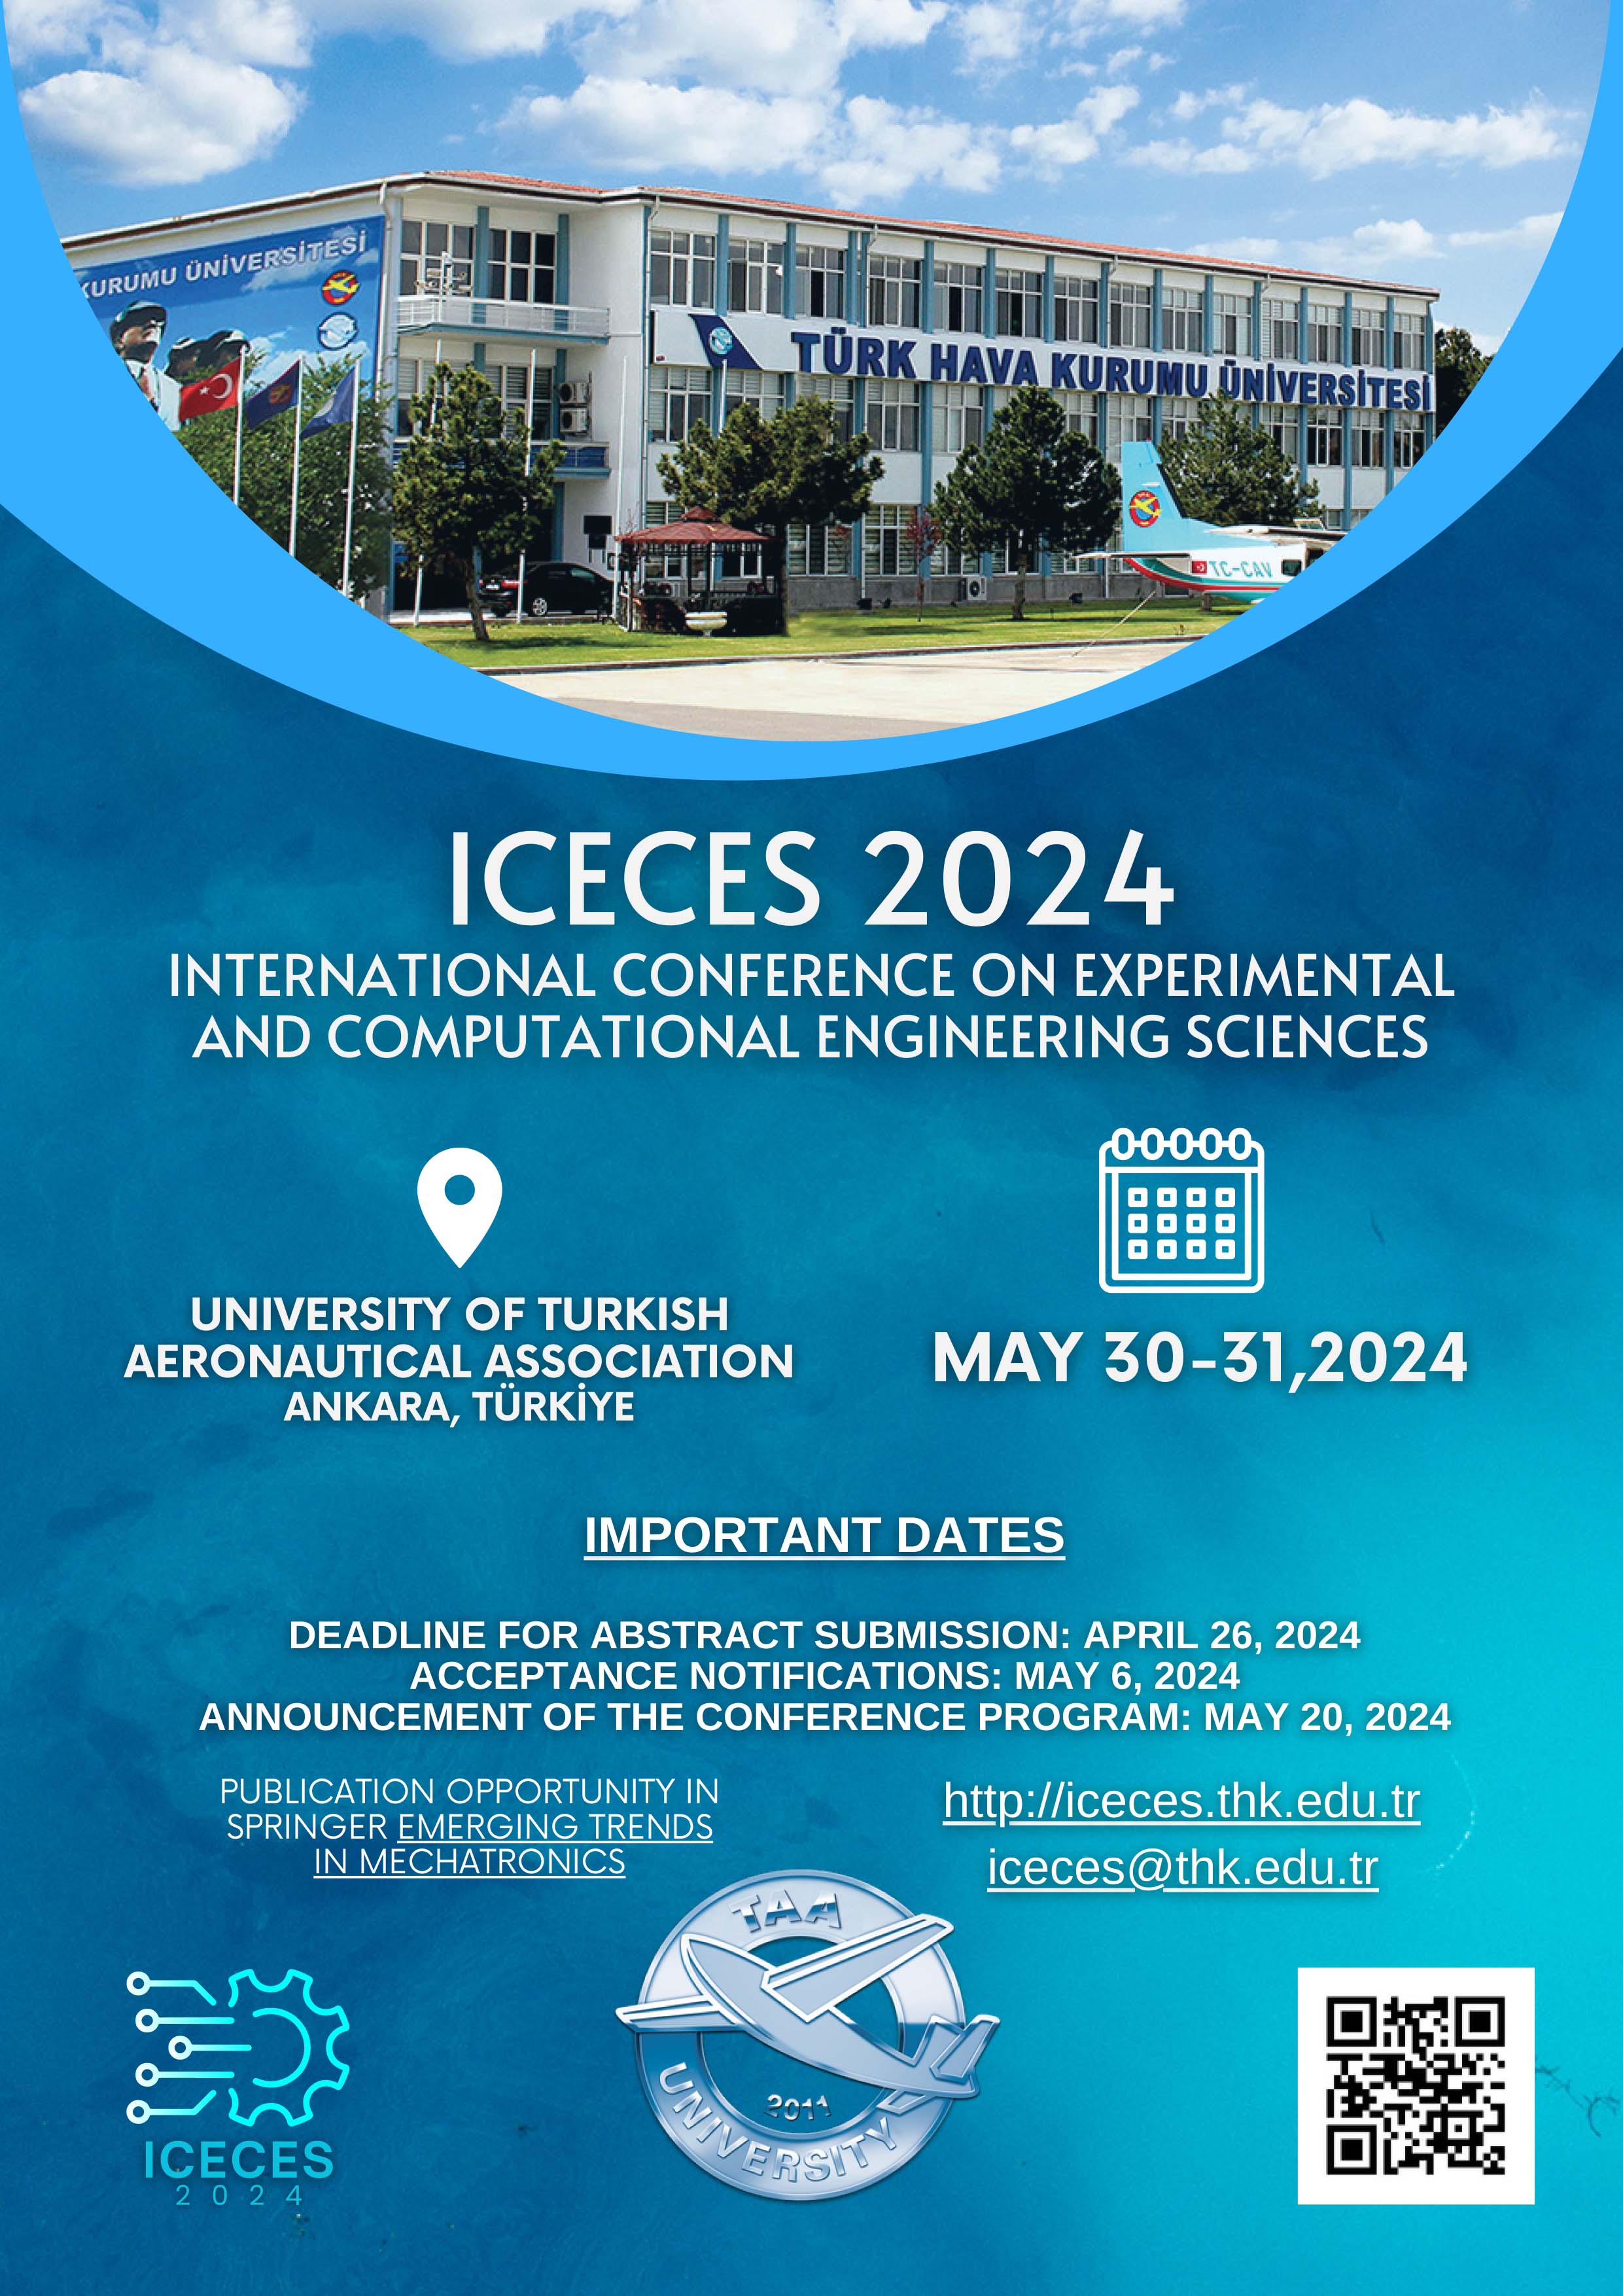 1. International Conference on Experimental and Computational Engineering Sciences - ICECES 2024